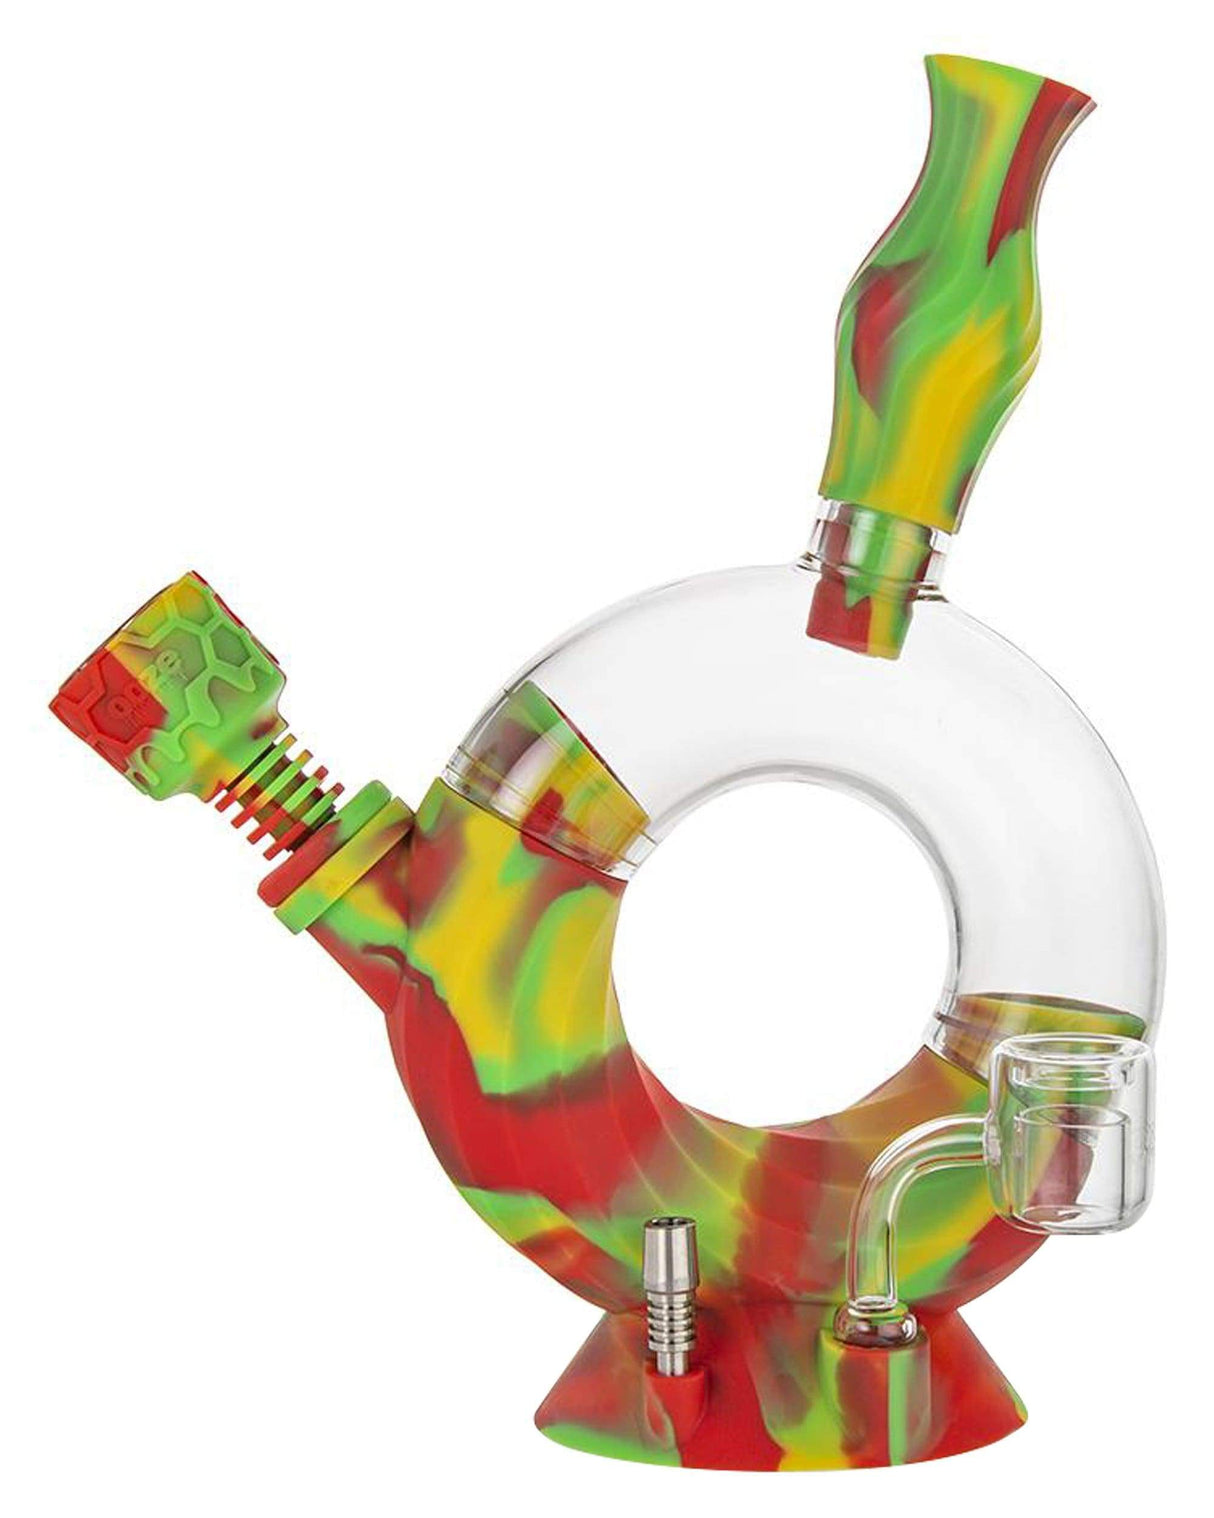 Ooze Ozone Silicone Bong in vibrant red, yellow, and green colors, with clear center, side view